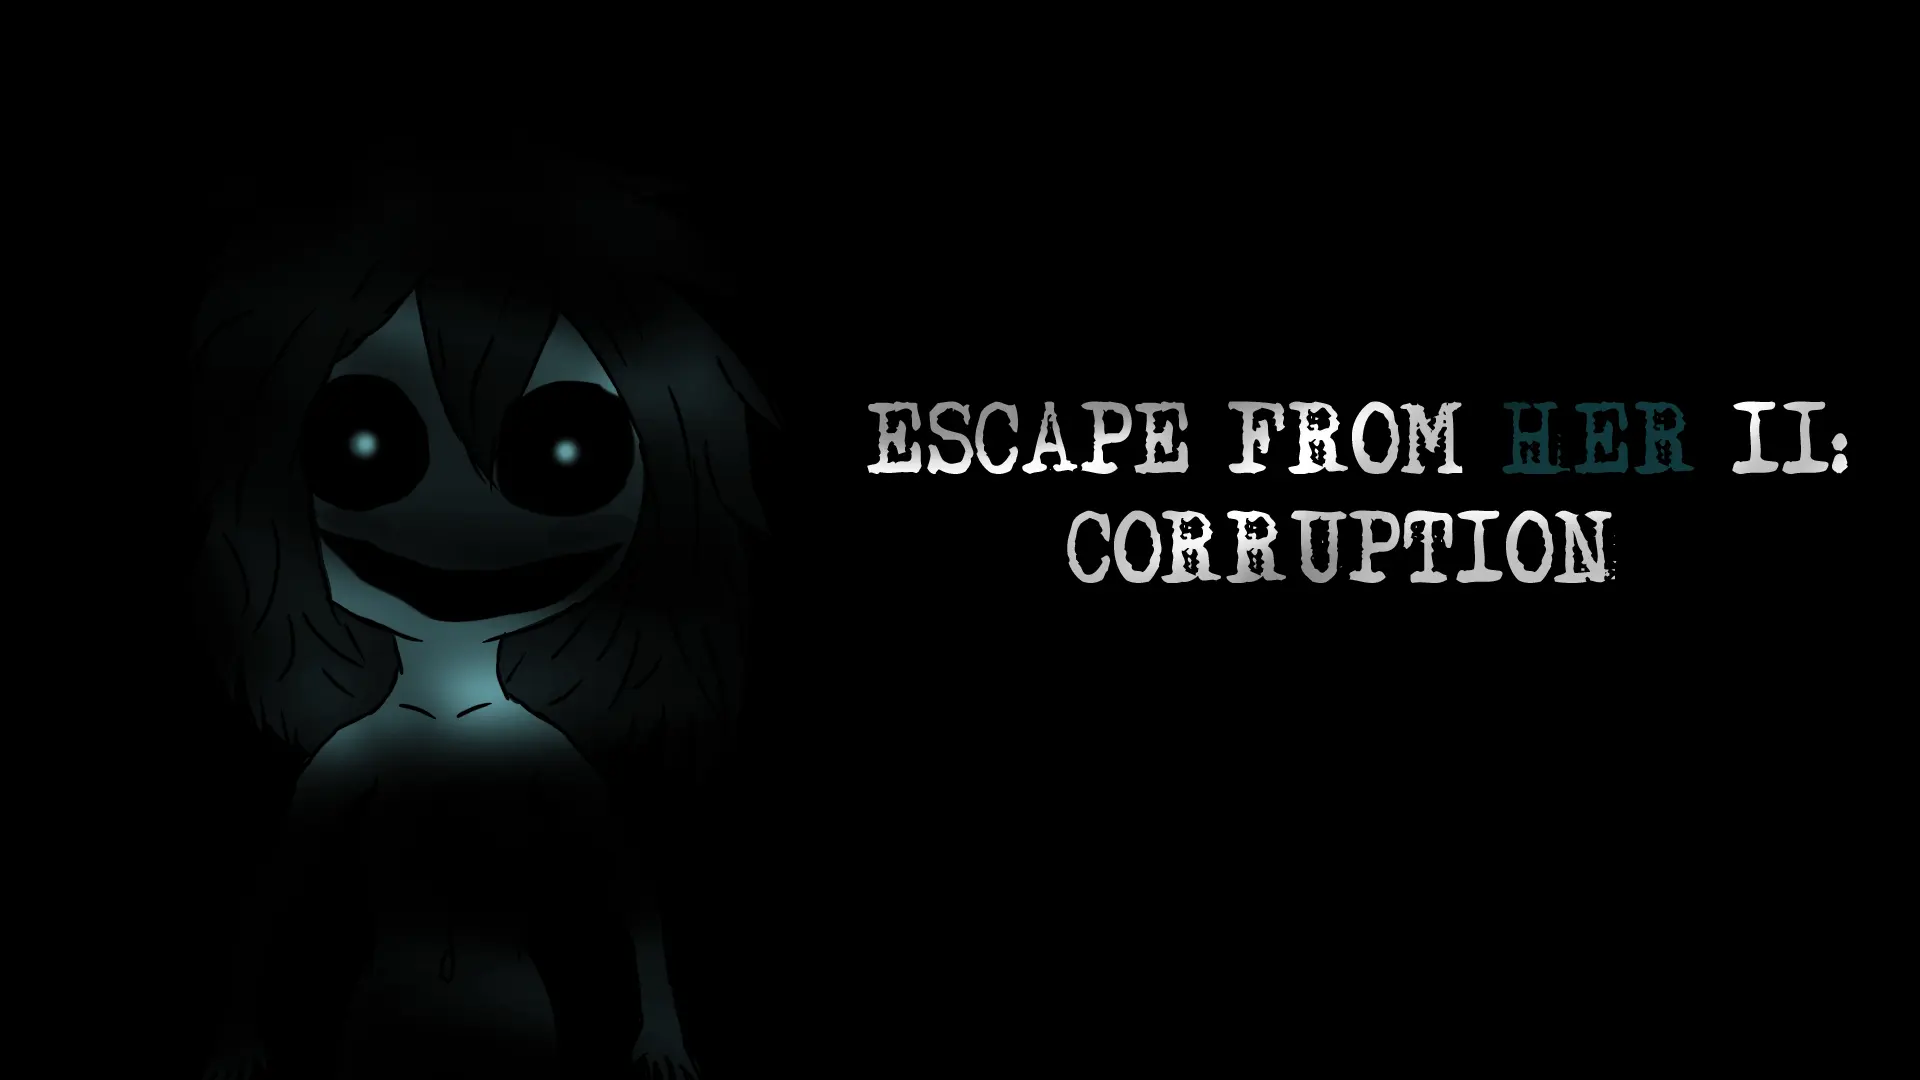 Escape from her II: Corruption main image